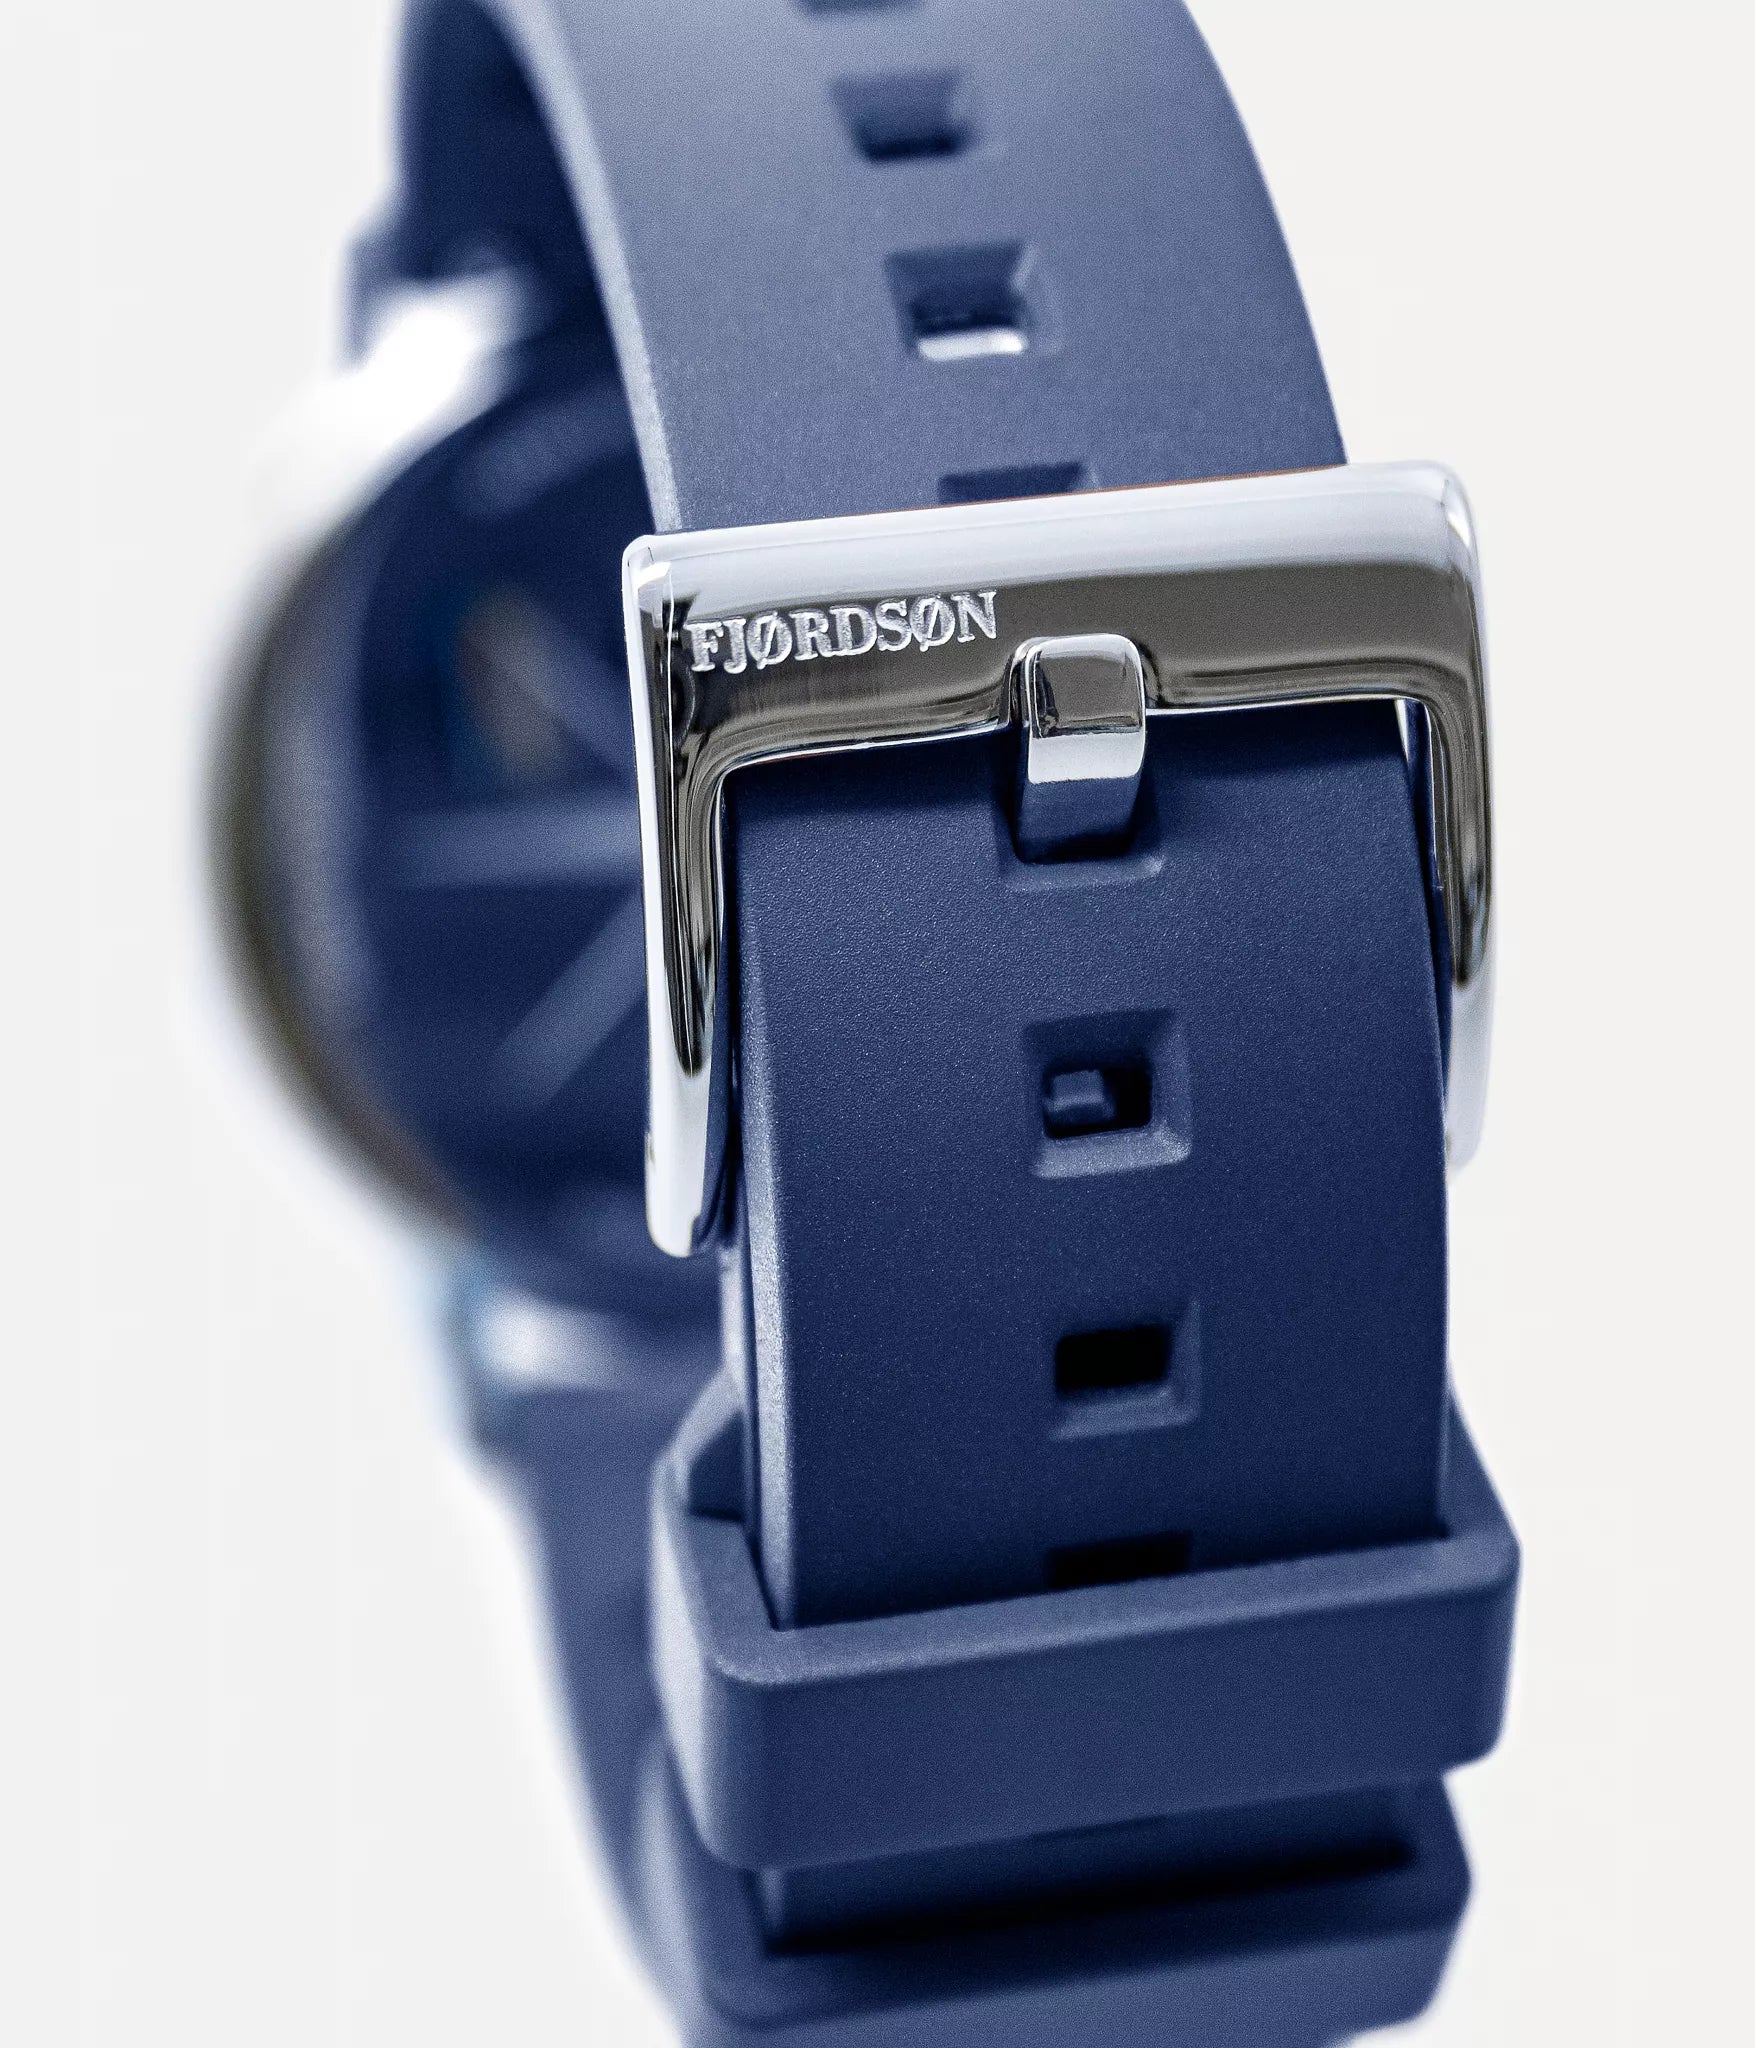 Watch strap lock shot - Fjordson watch with blue rubber watch strap - MEN - vegan & approved by PETA - Swiss made